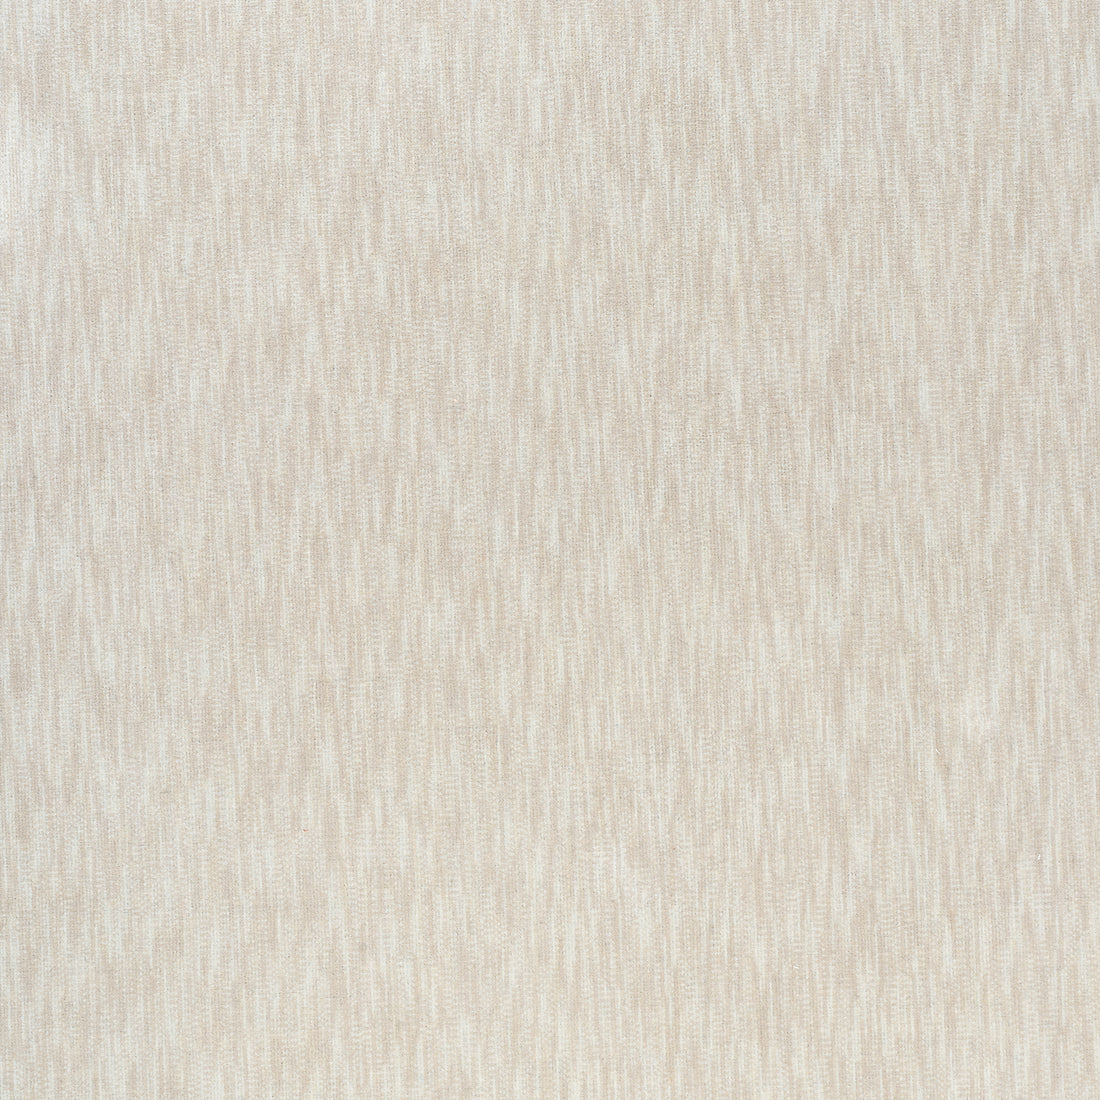 Riff Velvet fabric in oyster color - pattern number W72831 - by Thibaut in the Woven Resource 13: Fusion Velvets collection